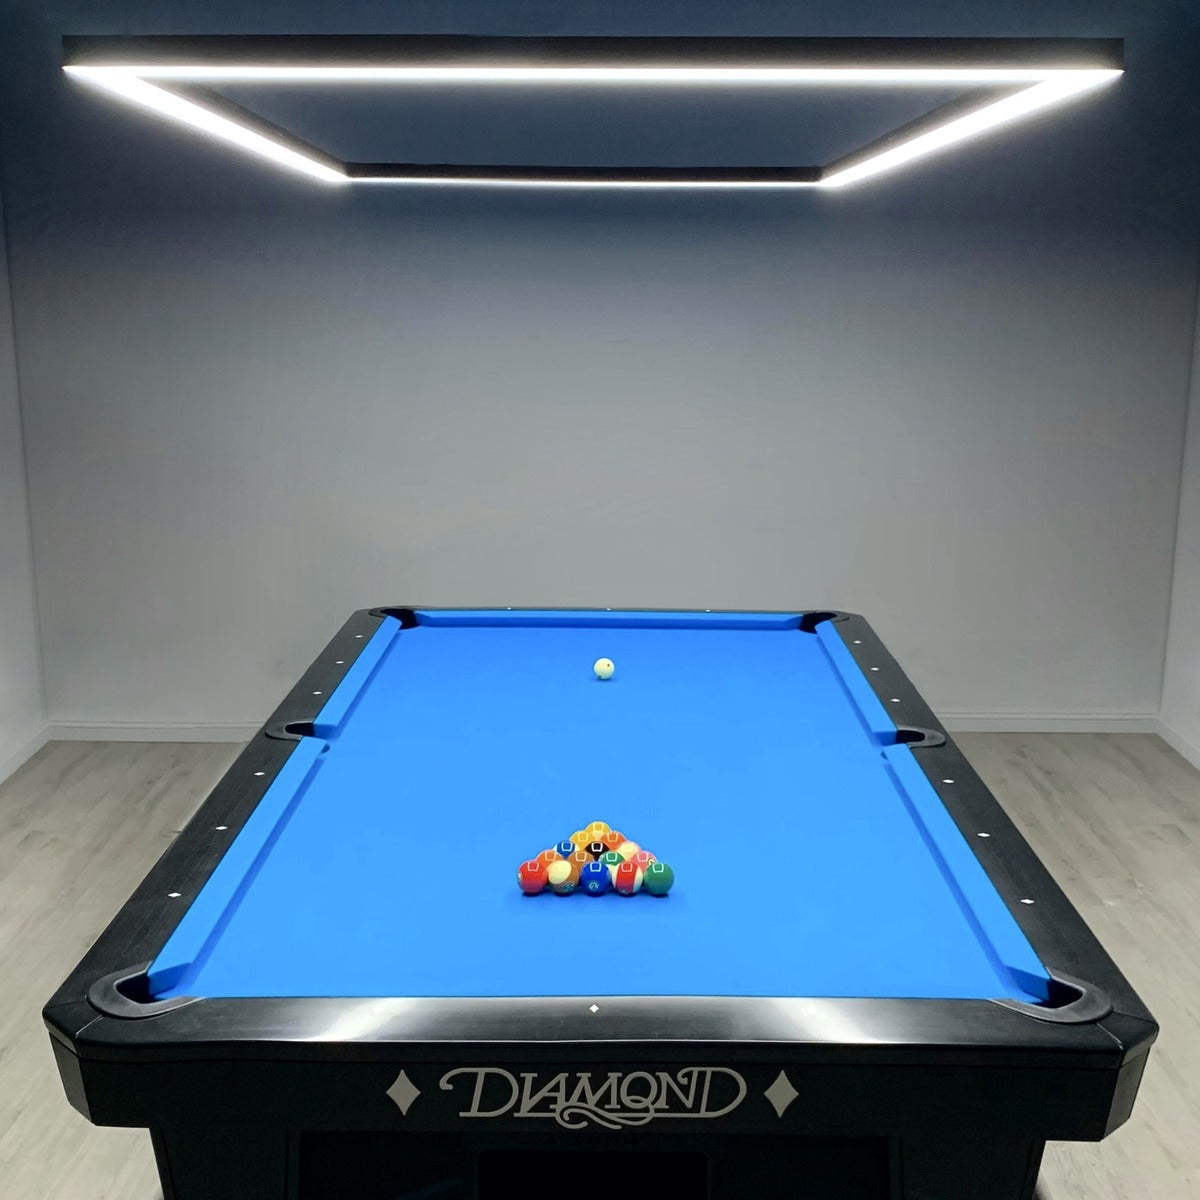 LED pool table light over a diamond pool table - front